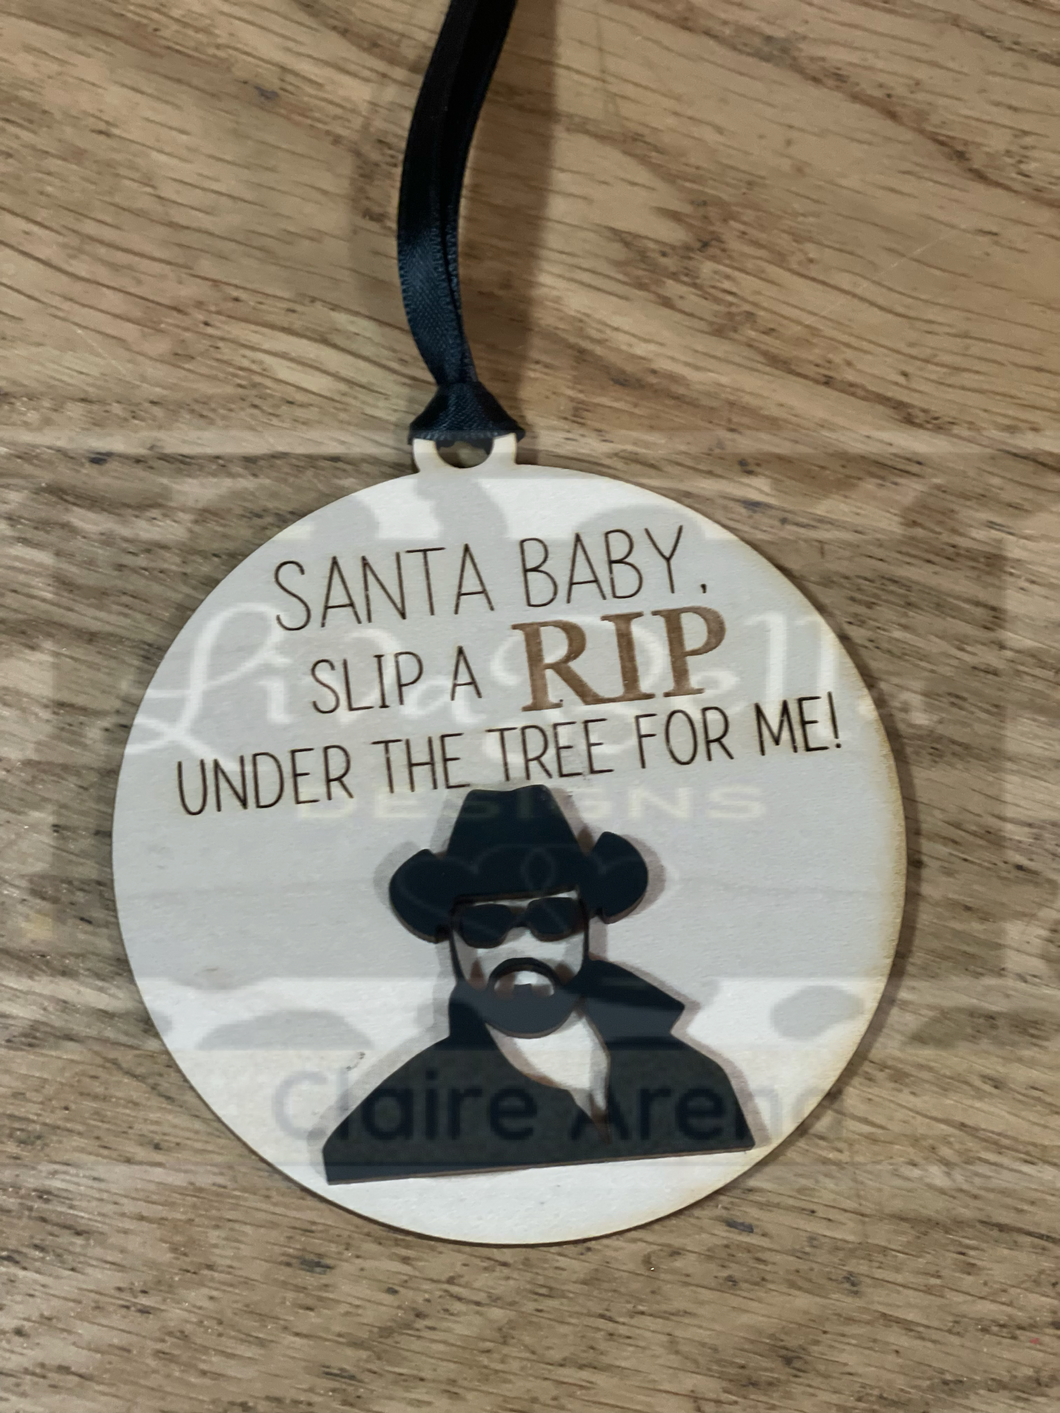 Yellowstone Ornament - Santa baby, slip a RIP under the tree for me